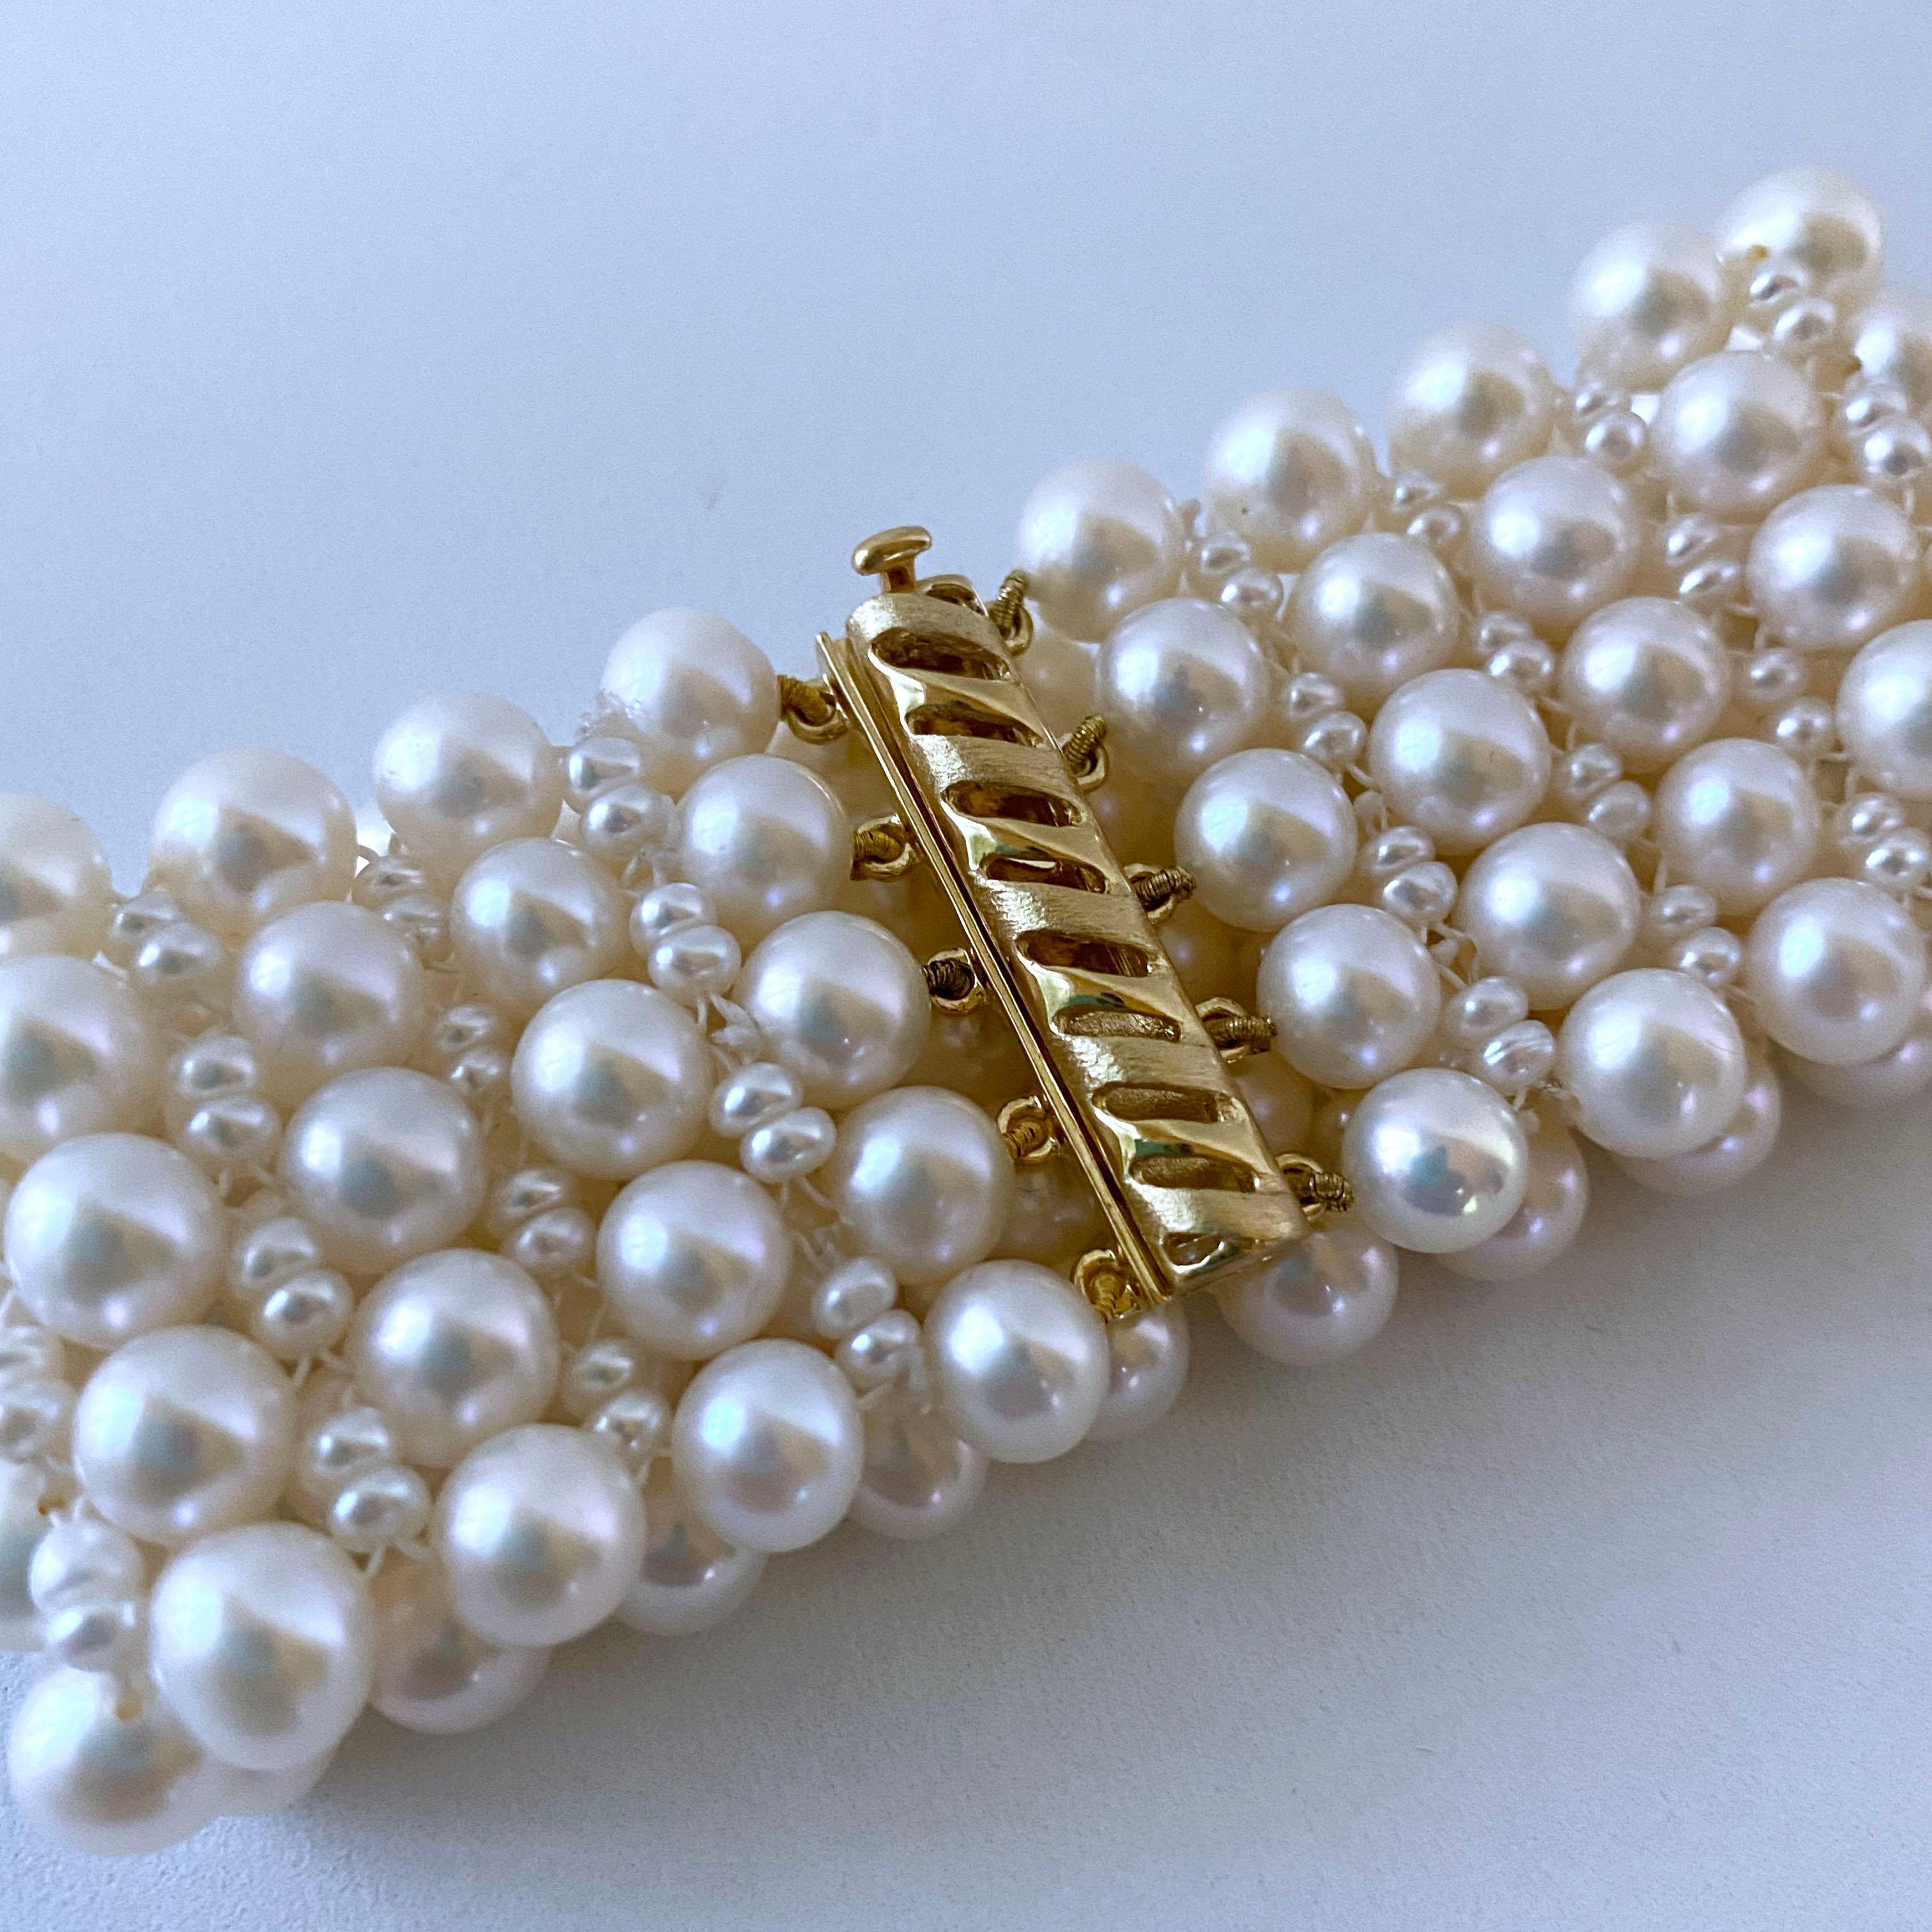 Gorgeous and classic piece by Marina J. This bracelet is made from all multi sized cultured White Pearls with a soft iridescent luster, all intricately woven together into a fine lace like design. The lace weaving gives a regal and elegant feel, and